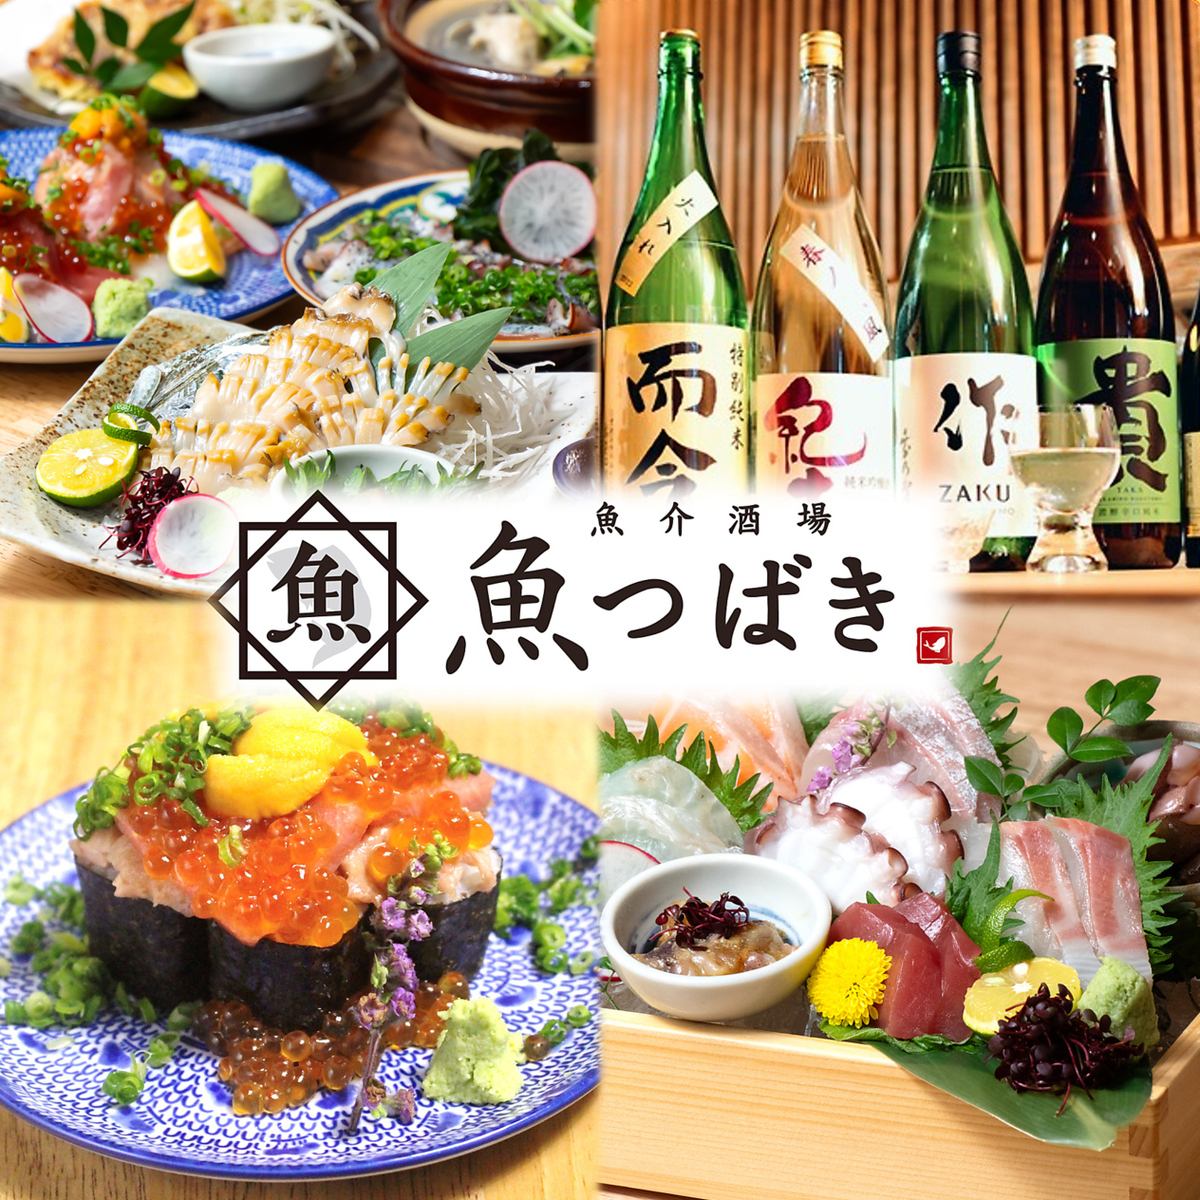 [Station Chika] Enjoy delicious seafood and sake! 1,078 yen for 8 types is the cheapest in the area? The best value-for-money izakaya